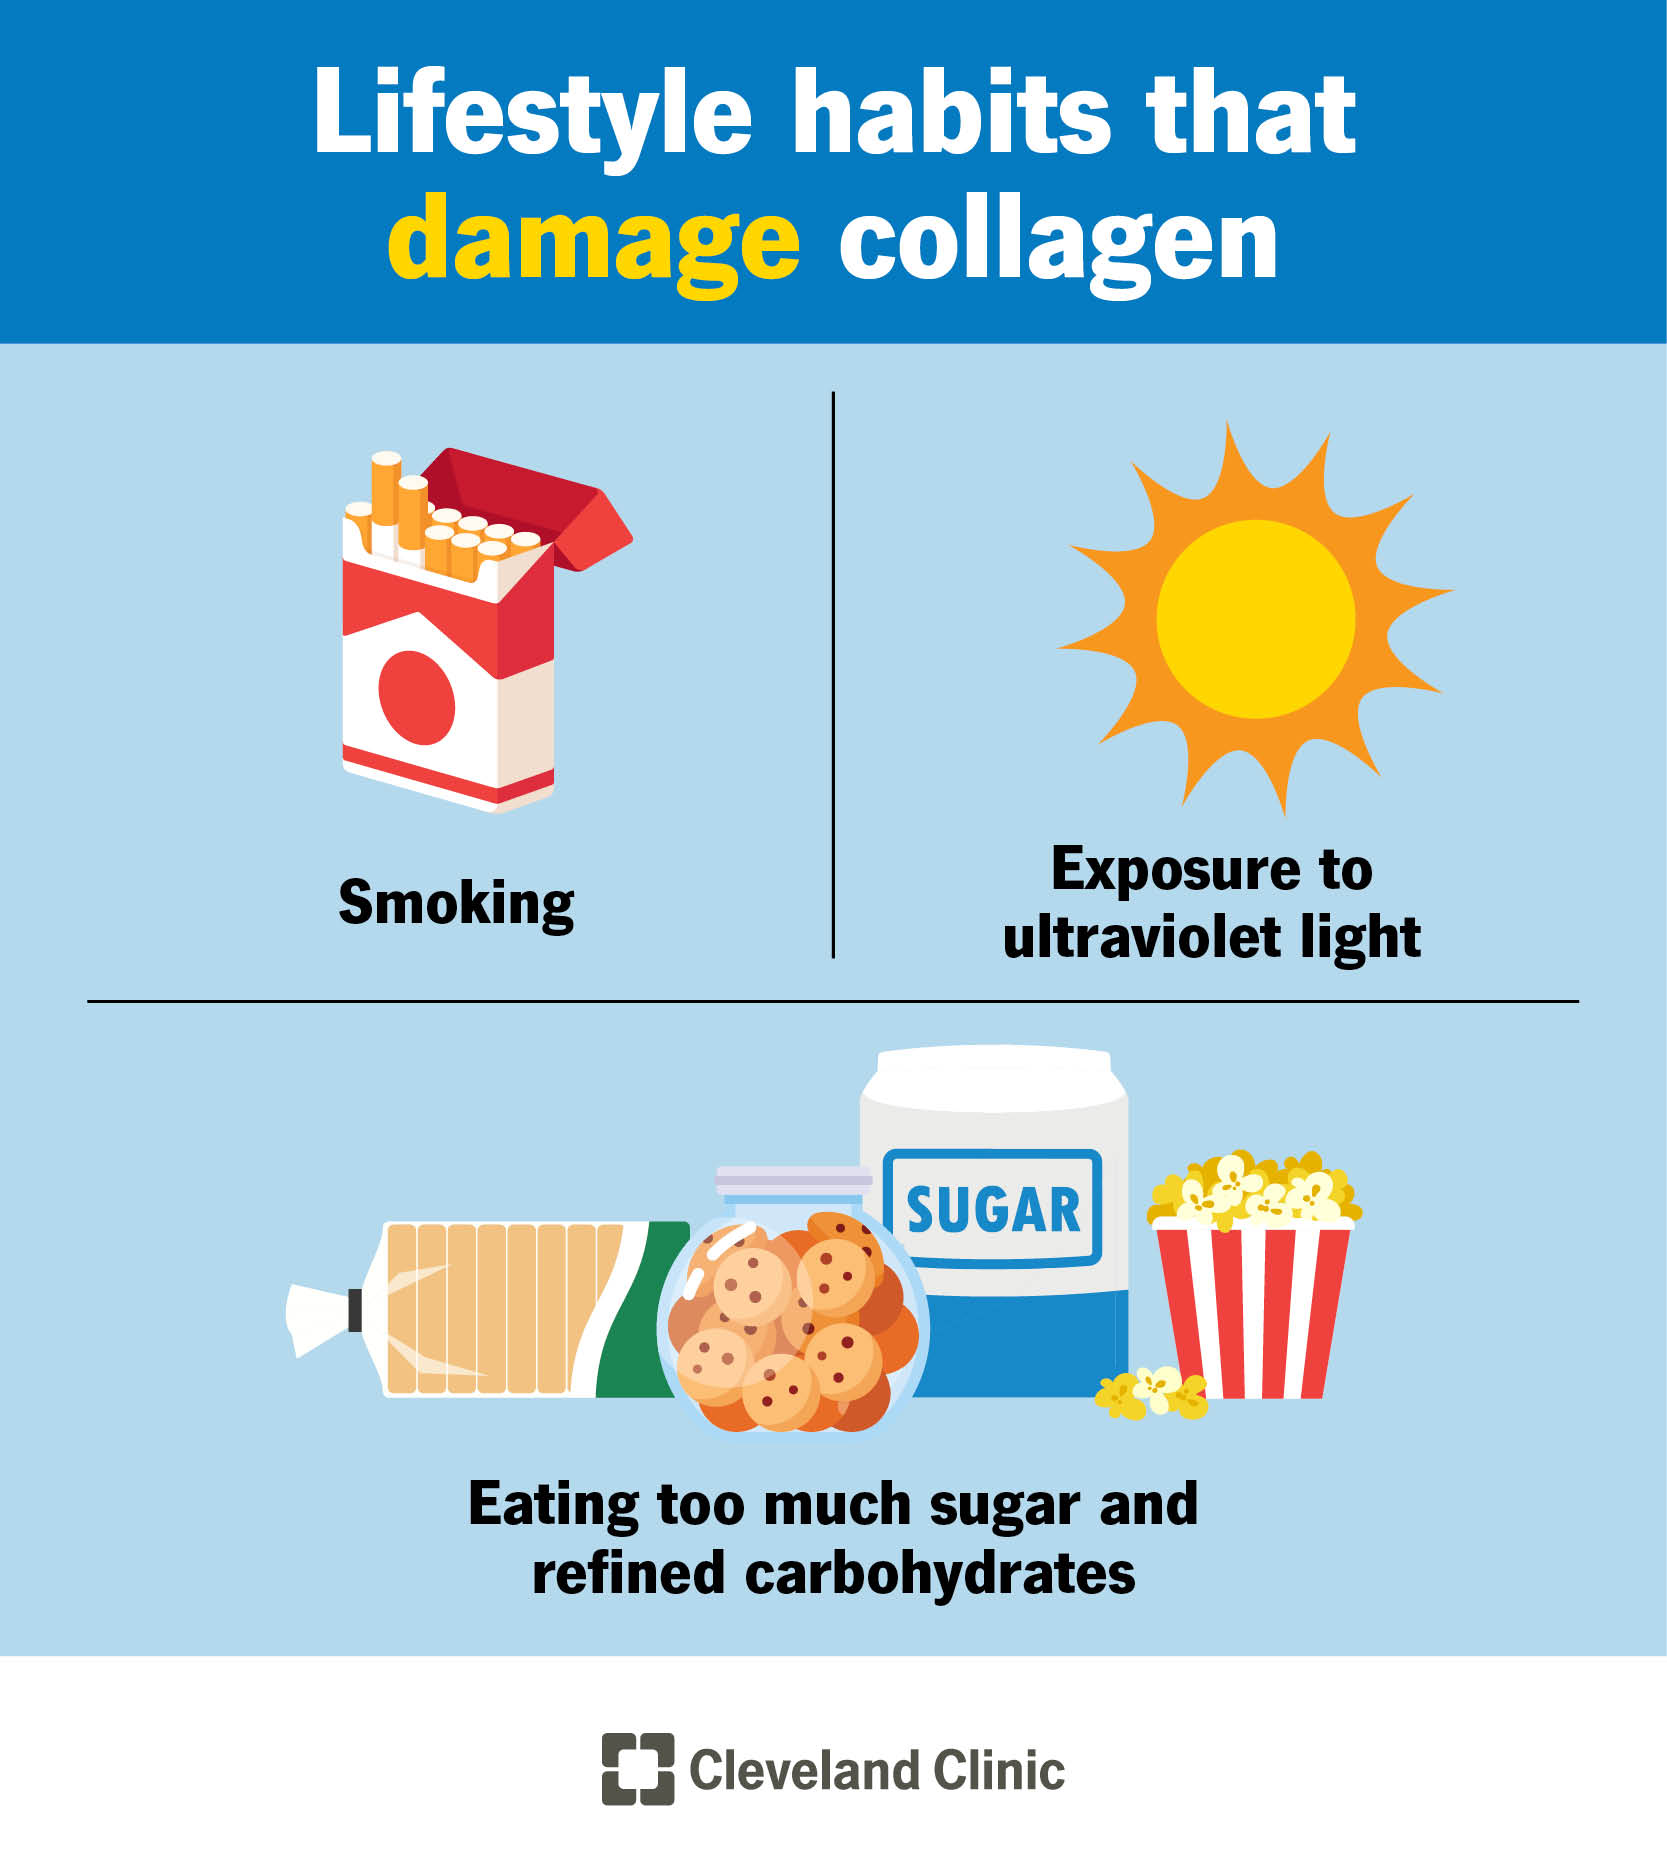 Habits that damage collagen include smoking, excessive exposure to UV light, eating sugar and carbohydrates.